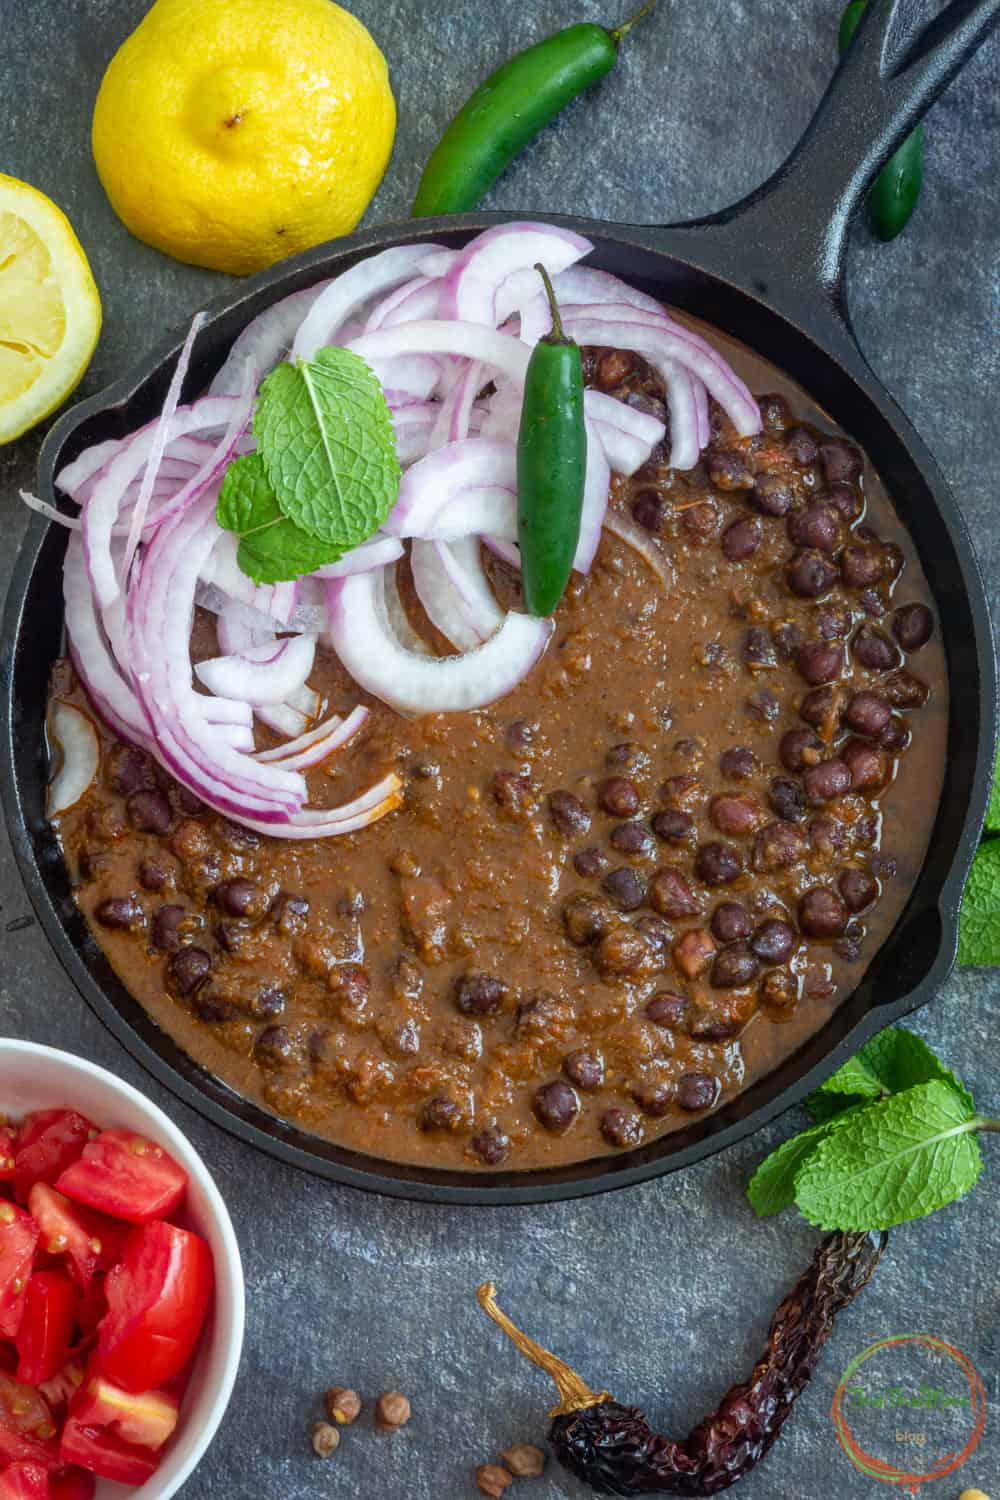 Black Chickpeas Curry garnished with sliced onions and green chili.